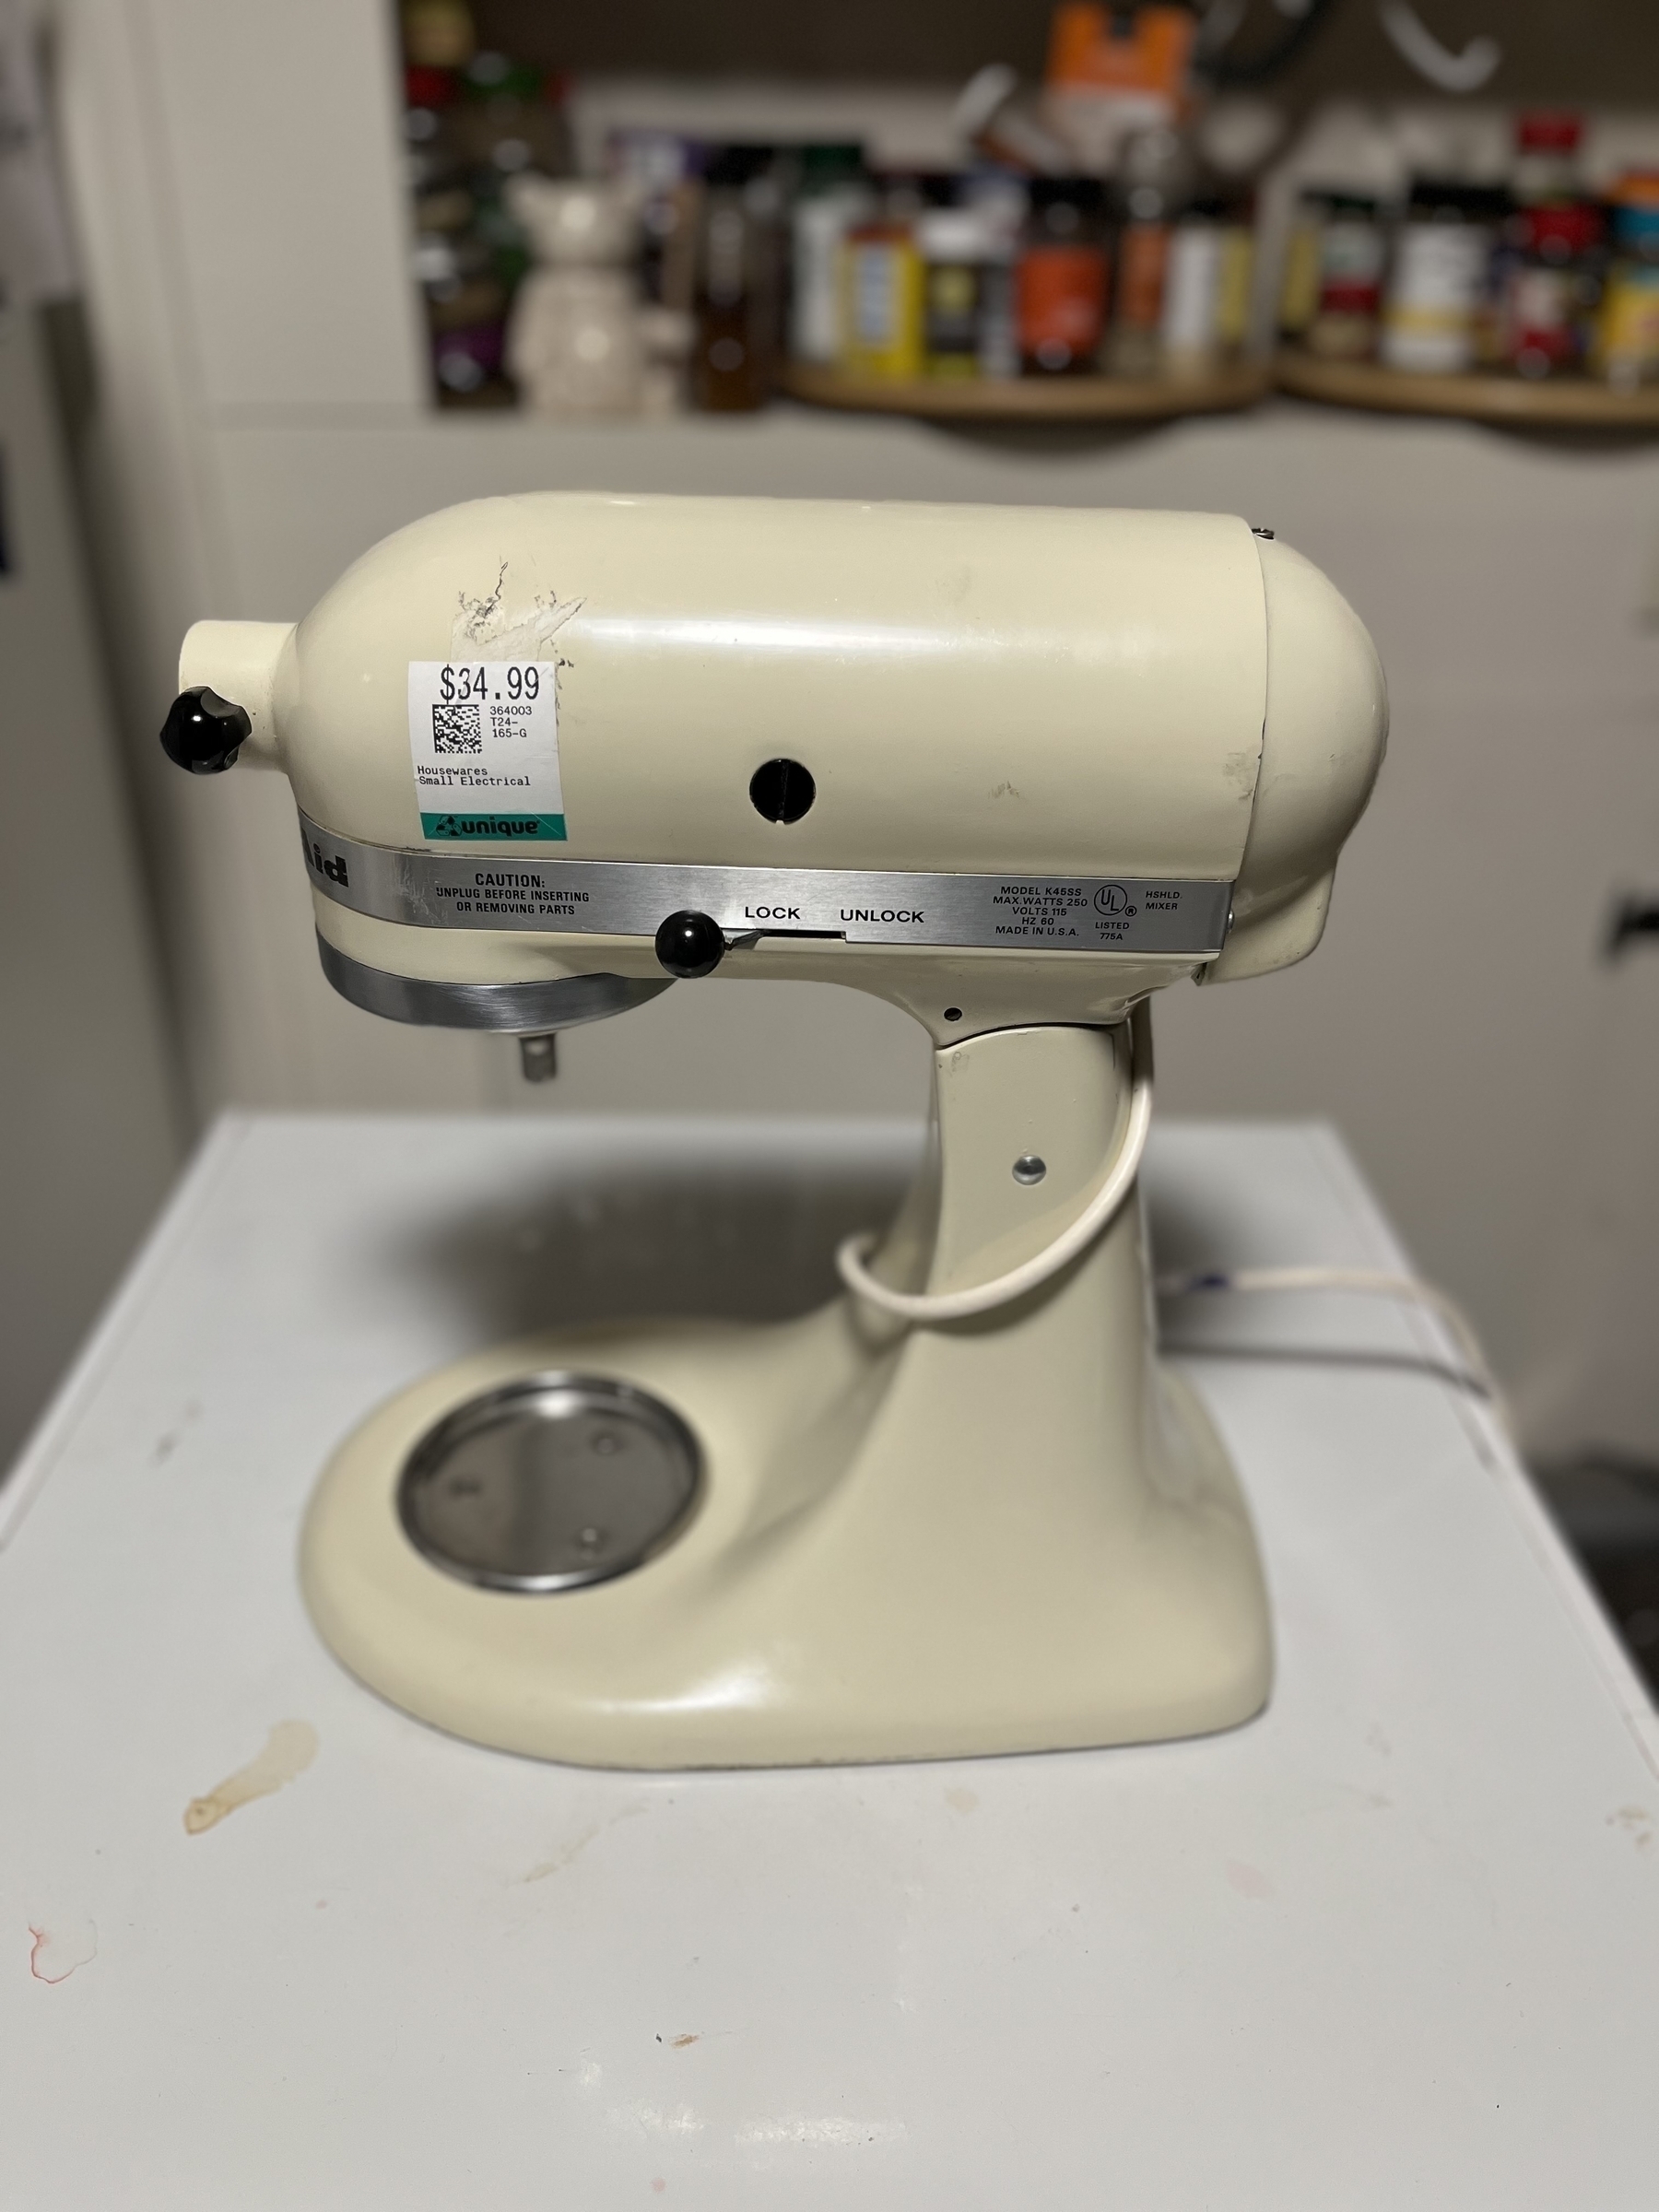 KitchenAid mixer showing $34.99 price and K45SS model and 250 watts. 